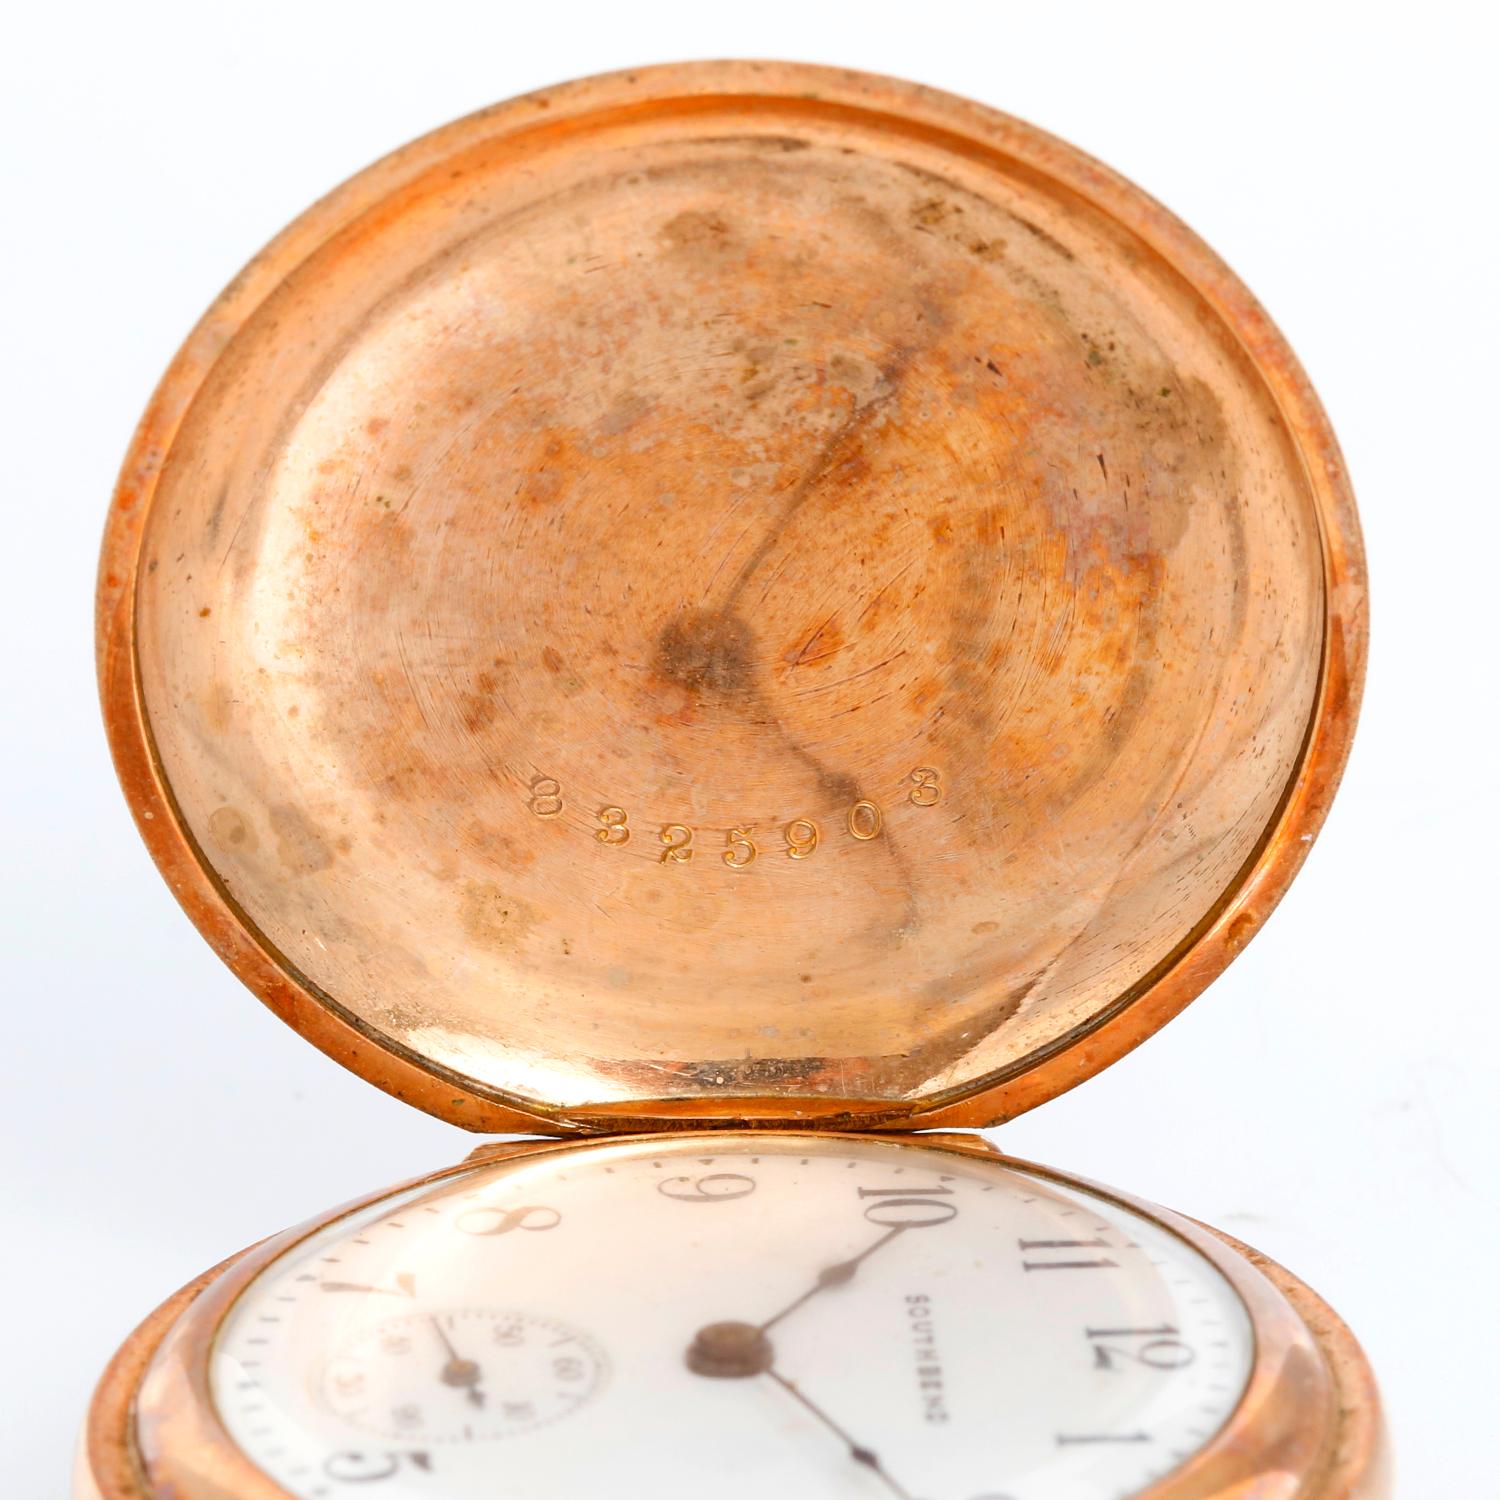 South Bend Gold Filled Ladies Pendant Pocket Watch - Manual winding. Gold filled; ornate engraving ( 35 mm ). White dial with Arabic numerals. Pre-owned with custom box.
Will be serviced upon purchase. Delivery time will vary. Circa 1911.